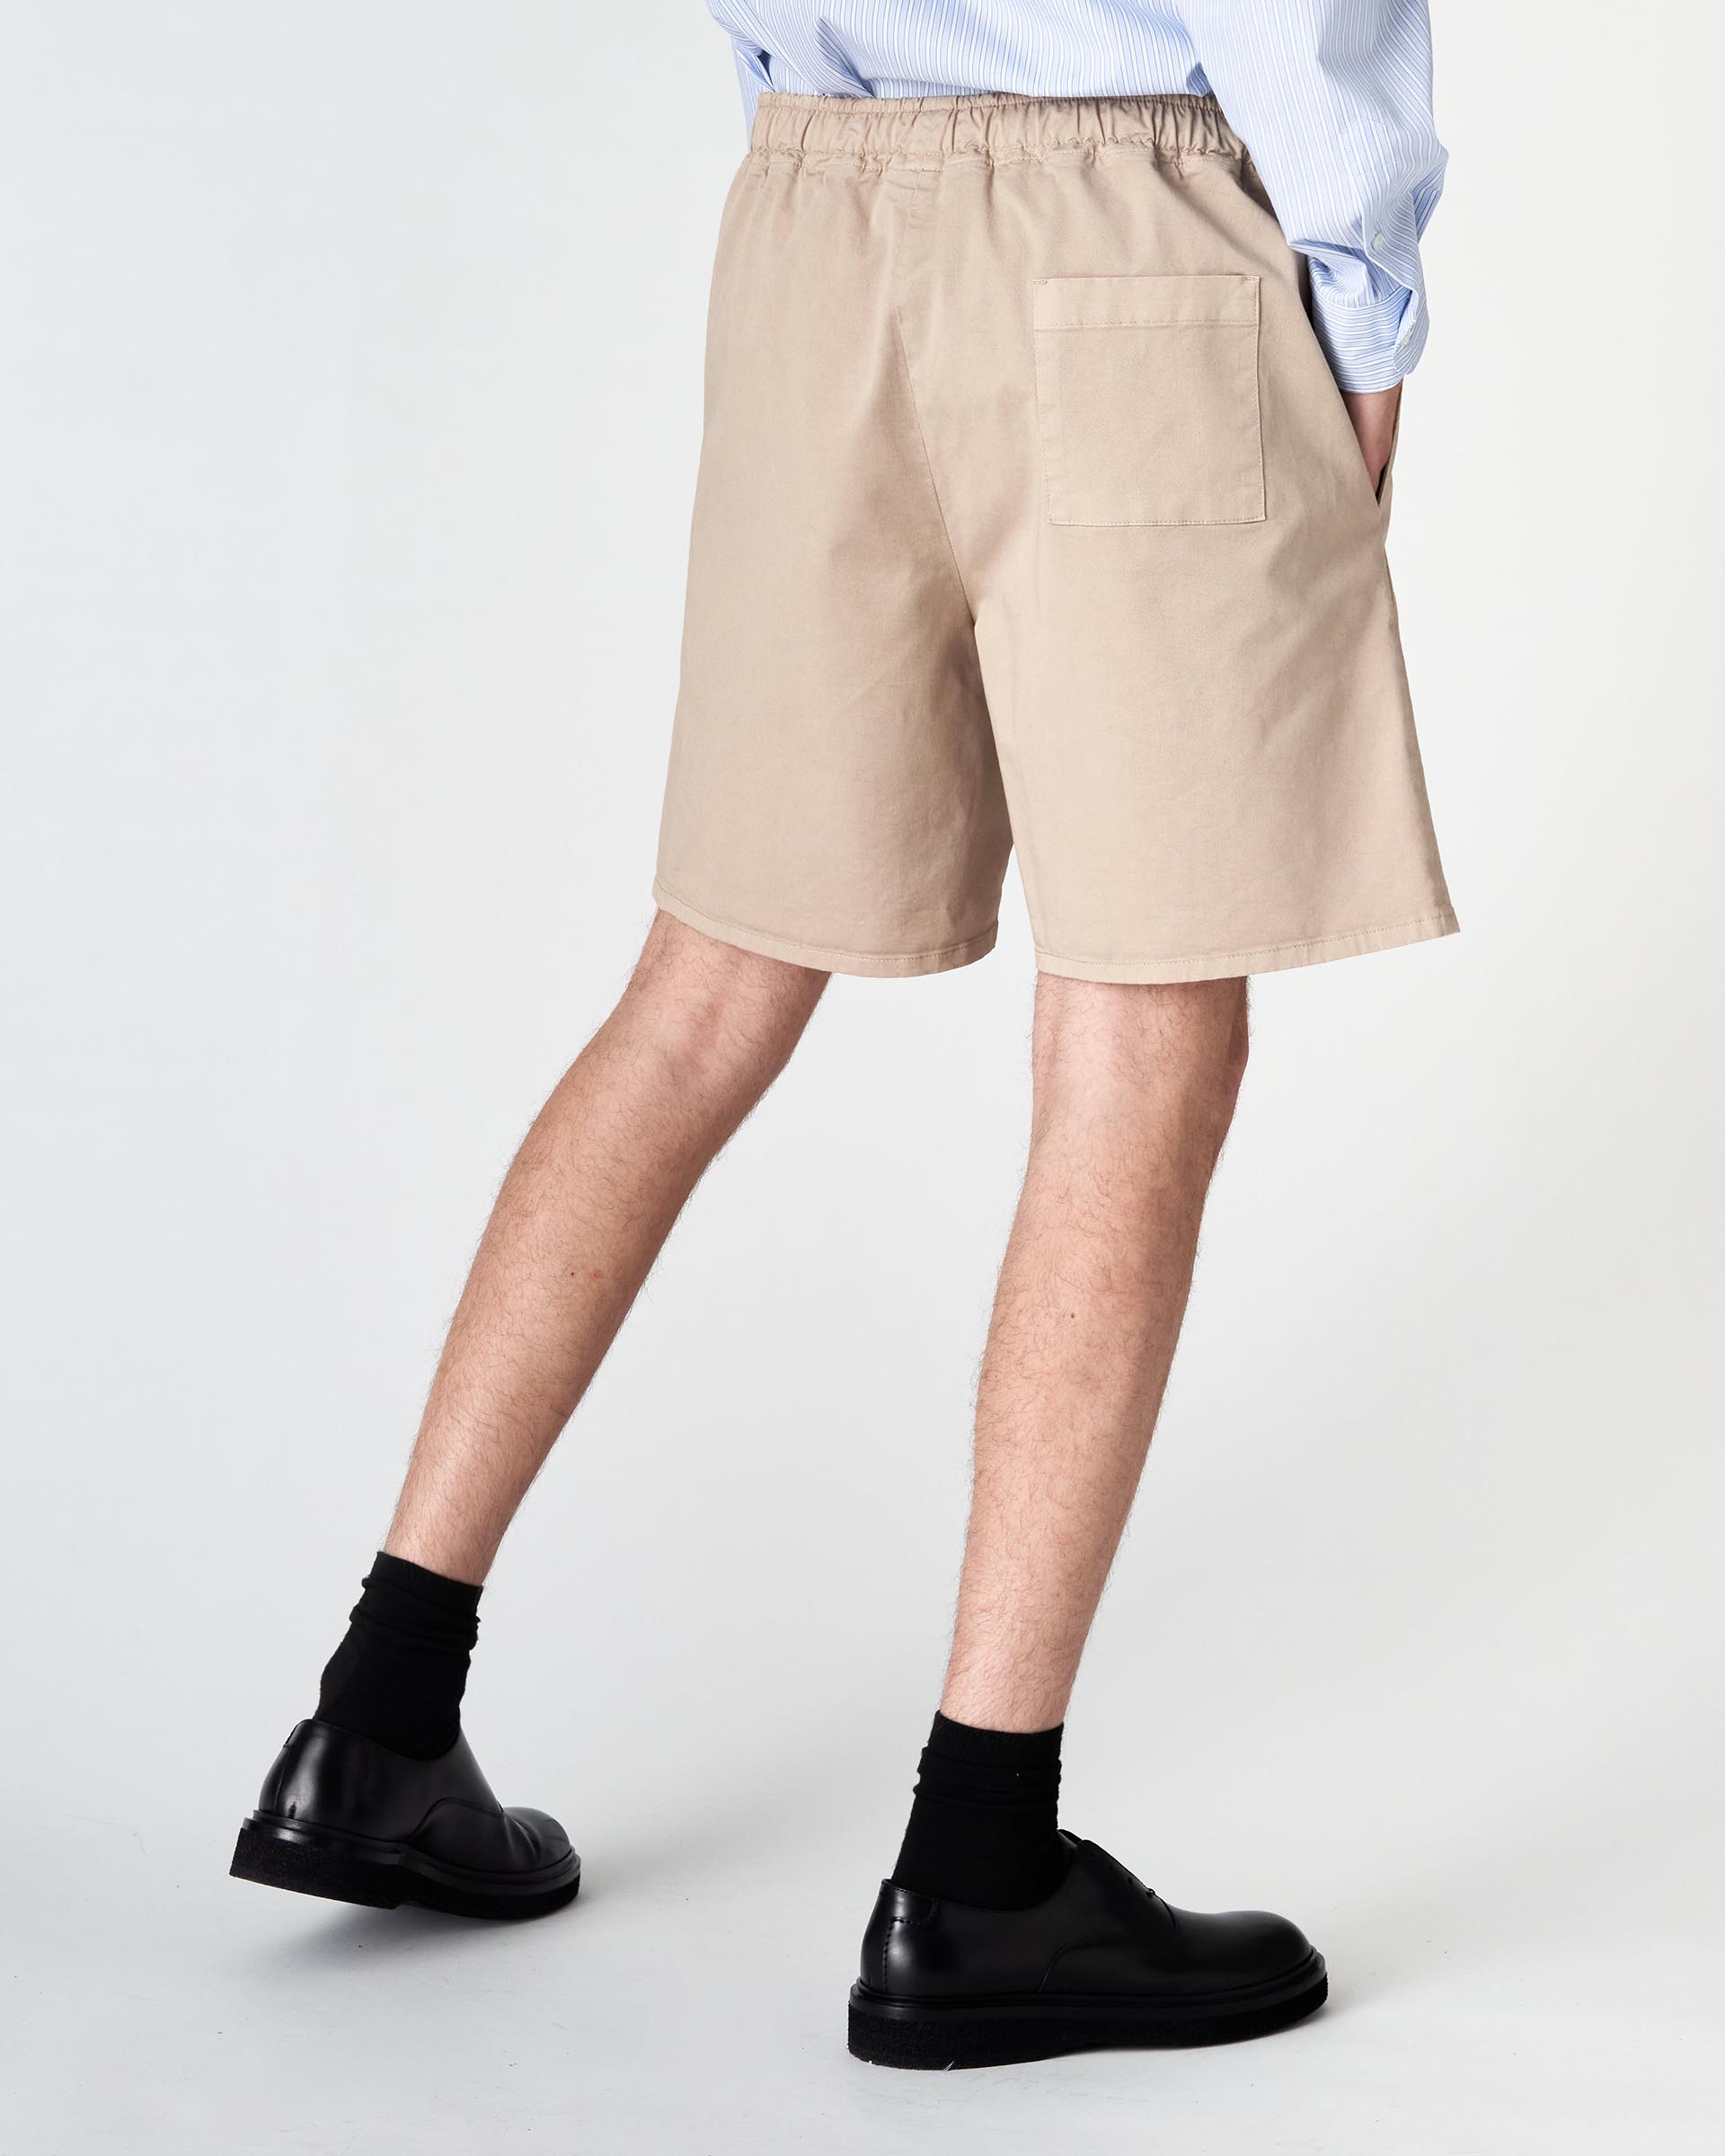 The Market Store | Short Pants With Elastic Waistband